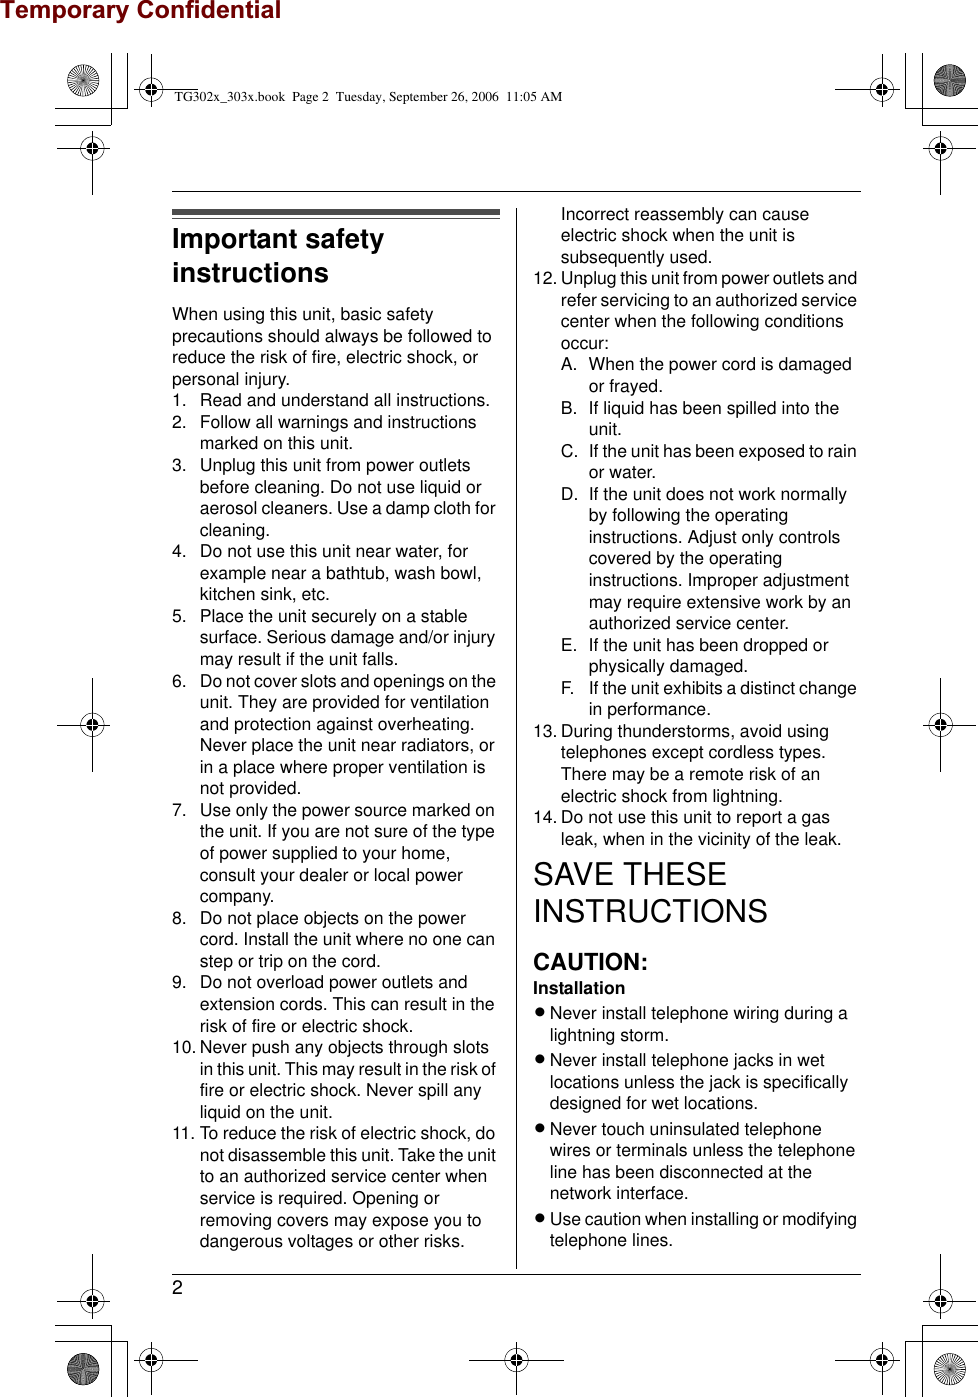 2Important safety instructionsWhen using this unit, basic safety precautions should always be followed to reduce the risk of fire, electric shock, or personal injury.1. Read and understand all instructions.2. Follow all warnings and instructions marked on this unit.3. Unplug this unit from power outlets before cleaning. Do not use liquid or aerosol cleaners. Use a damp cloth for cleaning.4. Do not use this unit near water, for example near a bathtub, wash bowl, kitchen sink, etc.5. Place the unit securely on a stable surface. Serious damage and/or injury may result if the unit falls.6. Do not cover slots and openings on the unit. They are provided for ventilation and protection against overheating. Never place the unit near radiators, or in a place where proper ventilation is not provided.7. Use only the power source marked on the unit. If you are not sure of the type of power supplied to your home, consult your dealer or local power company.8. Do not place objects on the power cord. Install the unit where no one can step or trip on the cord.9. Do not overload power outlets and extension cords. This can result in the risk of fire or electric shock.10. Never push any objects through slots in this unit. This may result in the risk of fire or electric shock. Never spill any liquid on the unit.11. To reduce the risk of electric shock, do not disassemble this unit. Take the unit to an authorized service center when service is required. Opening or removing covers may expose you to dangerous voltages or other risks. Incorrect reassembly can cause electric shock when the unit is subsequently used.12. Unplug this unit from power outlets and refer servicing to an authorized service center when the following conditions occur:A. When the power cord is damaged or frayed.B. If liquid has been spilled into the unit.C. If the unit has been exposed to rain or water.D. If the unit does not work normally by following the operating instructions. Adjust only controls covered by the operating instructions. Improper adjustment may require extensive work by an authorized service center.E. If the unit has been dropped or physically damaged.F. If the unit exhibits a distinct change in performance.13. During thunderstorms, avoid using telephones except cordless types. There may be a remote risk of an electric shock from lightning.14. Do not use this unit to report a gas leak, when in the vicinity of the leak.SAVE THESE INSTRUCTIONSCAUTION:InstallationLNever install telephone wiring during a lightning storm.LNever install telephone jacks in wet locations unless the jack is specifically designed for wet locations.LNever touch uninsulated telephone wires or terminals unless the telephone line has been disconnected at the network interface.LUse caution when installing or modifying telephone lines.TG302x_303x.book  Page 2  Tuesday, September 26, 2006  11:05 AMTemporary Confidential